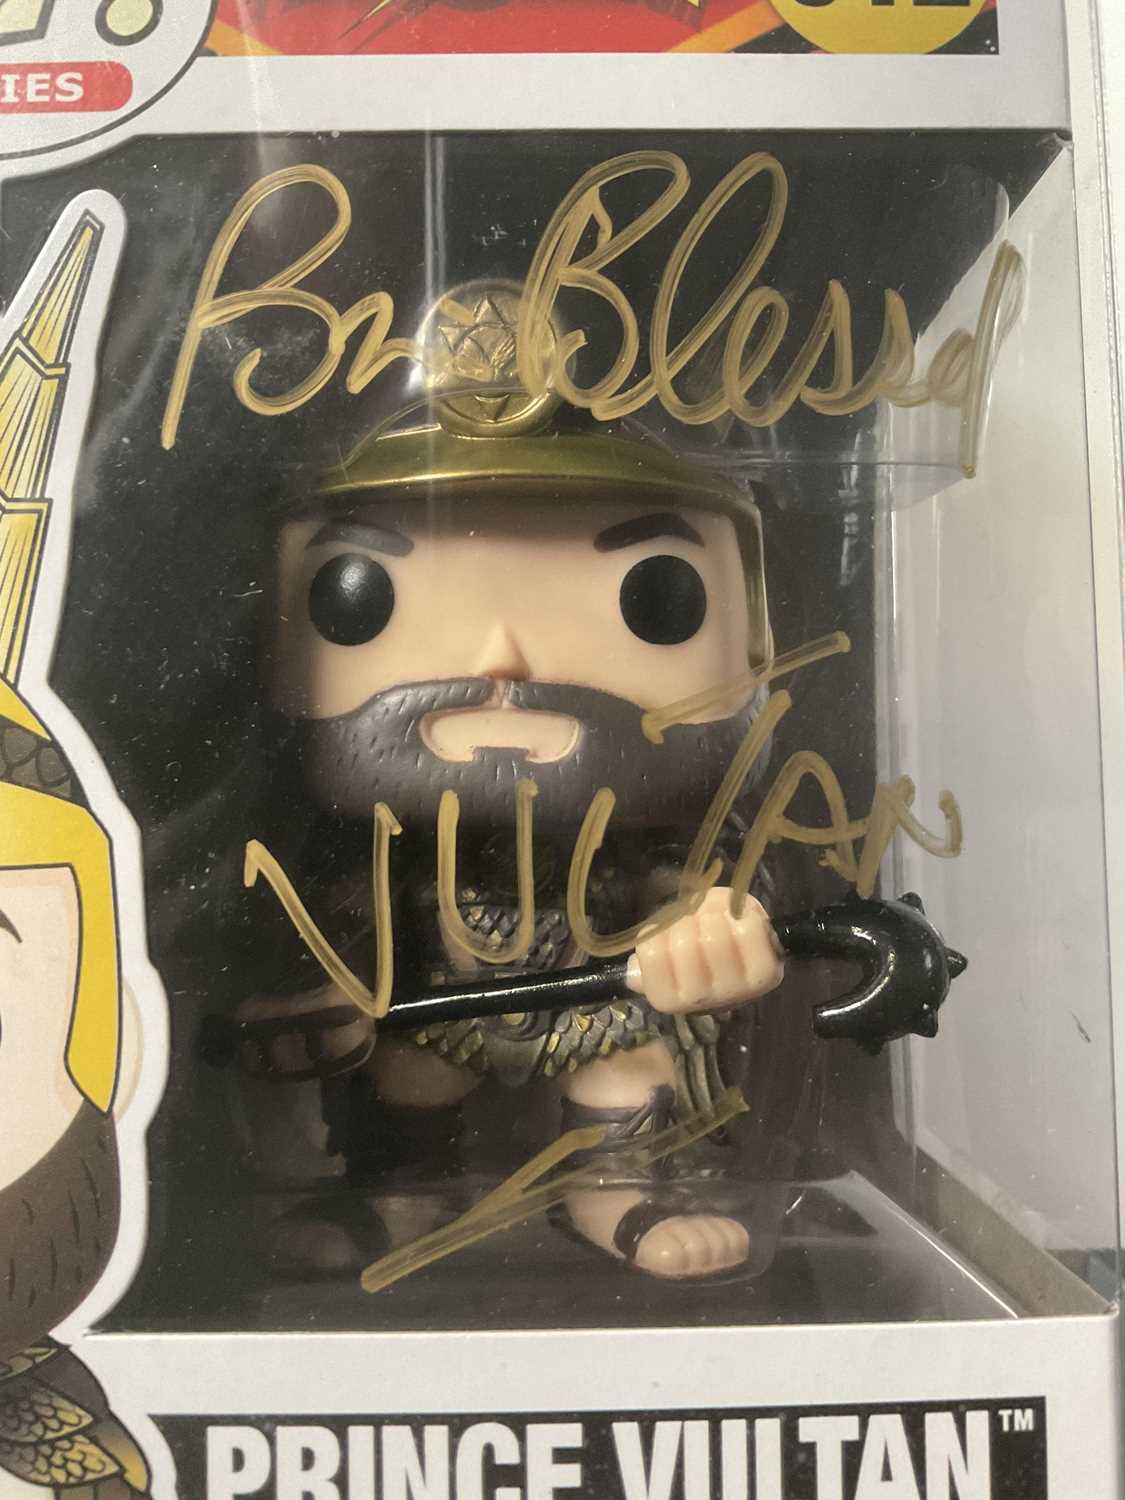 FUNKO POP - Flash Gordon Prince Vulcan funko pop signed by Brian Blessed with character name. - Image 3 of 3